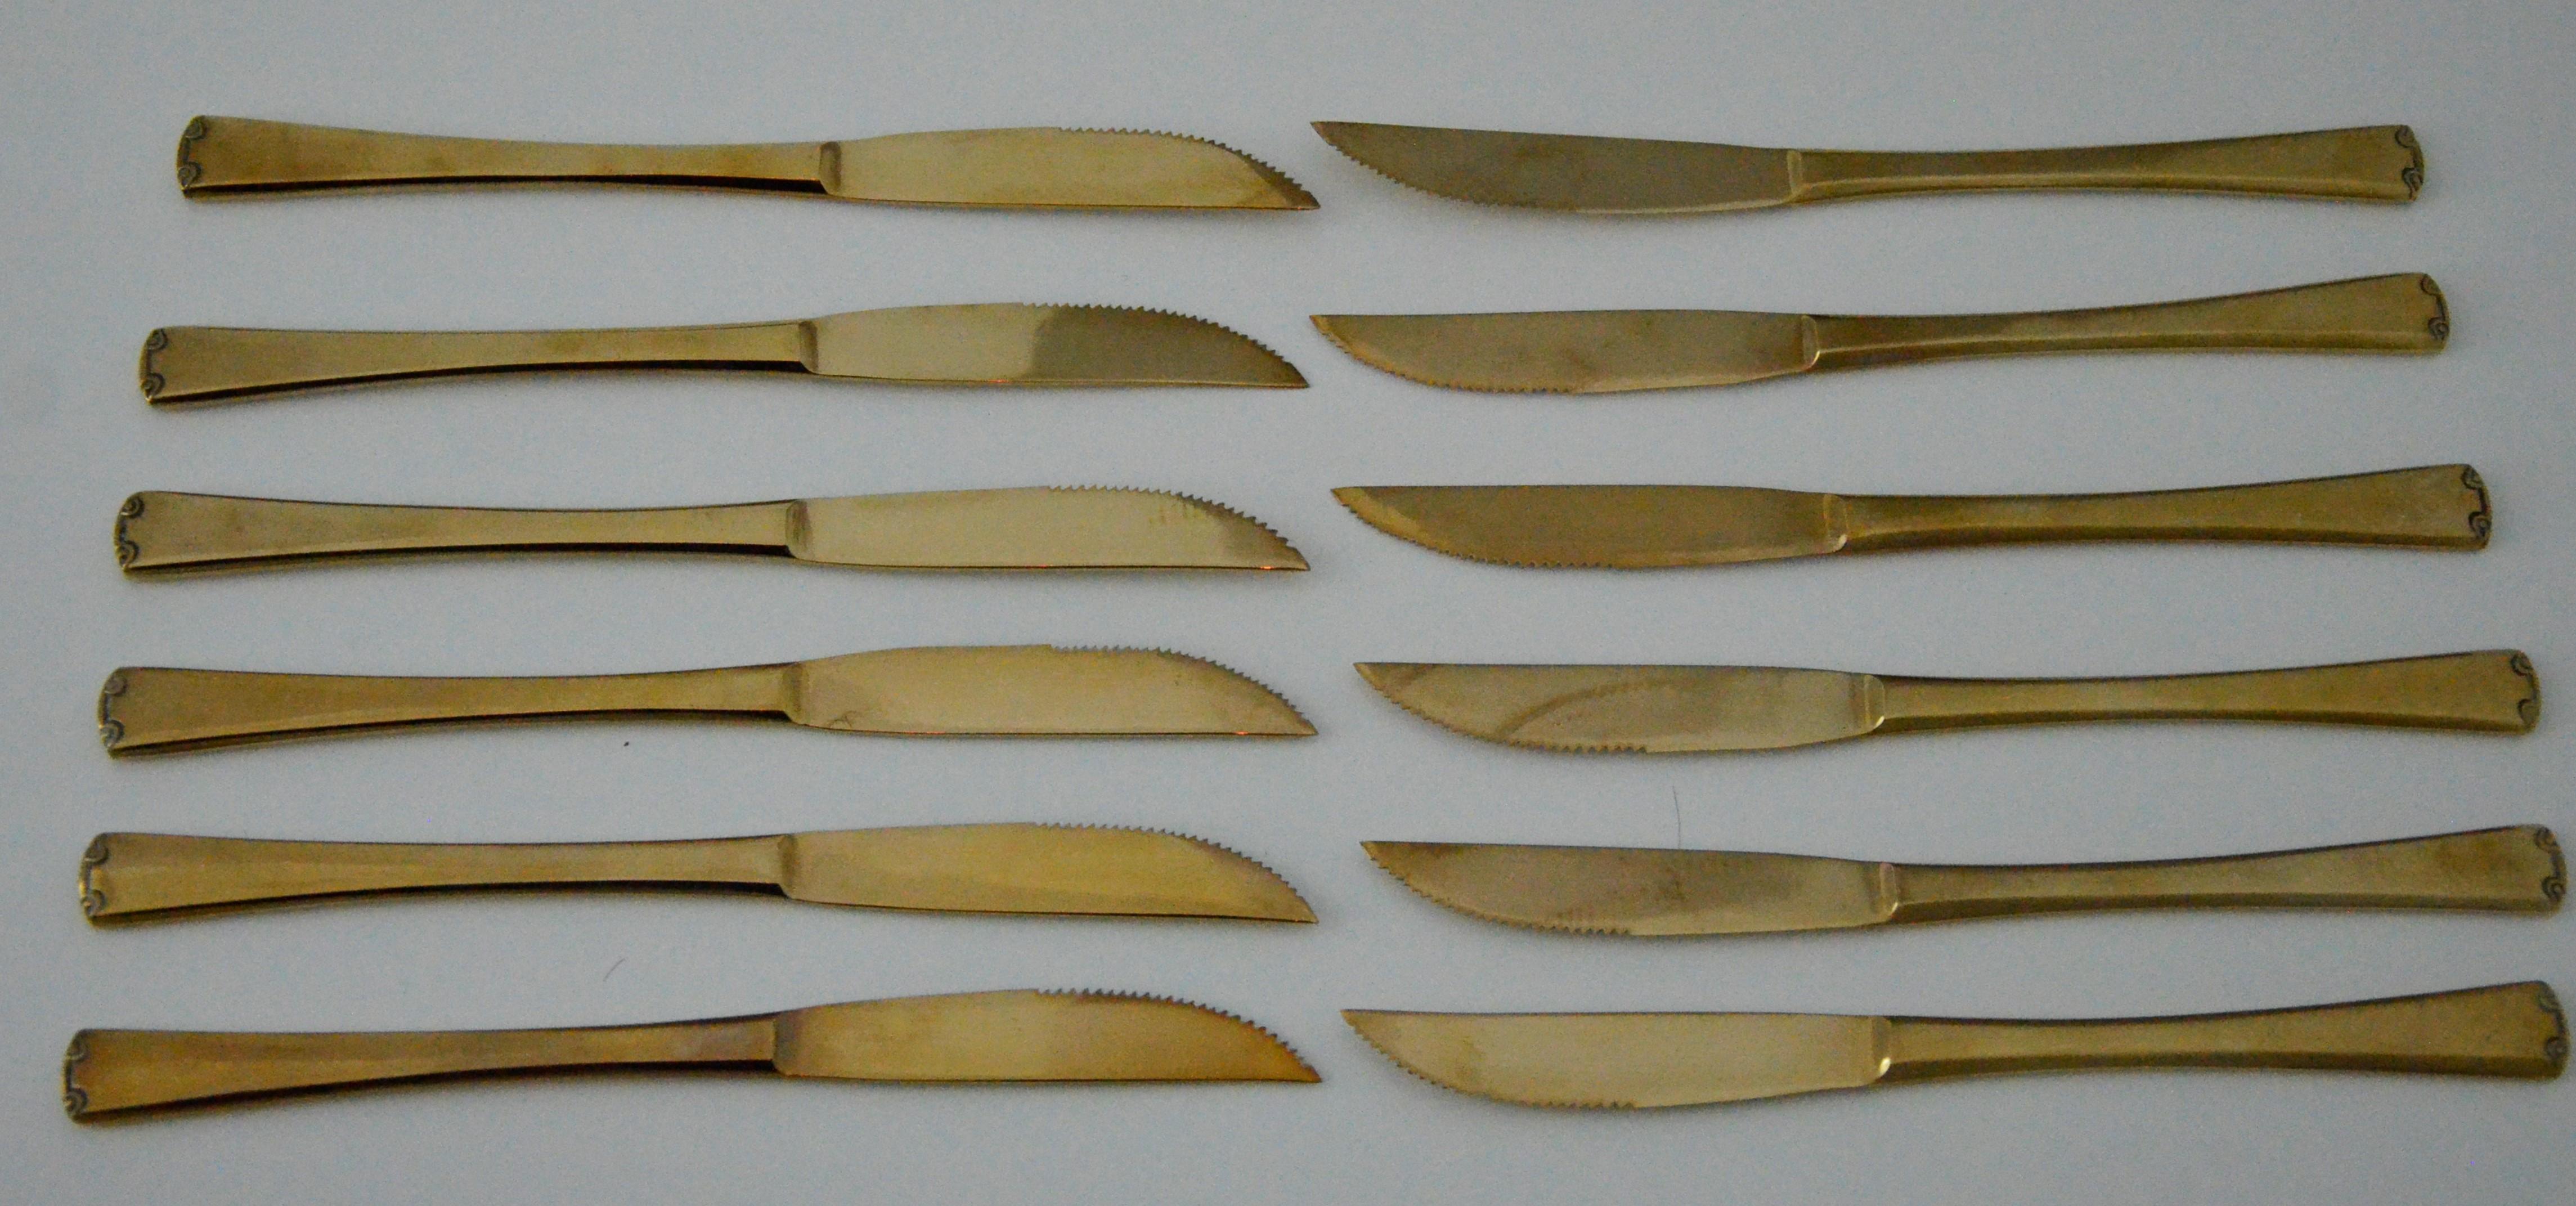 143 Piece Brass Plate Flatware with Service for Twelve and Twelve Serving Pieces 11